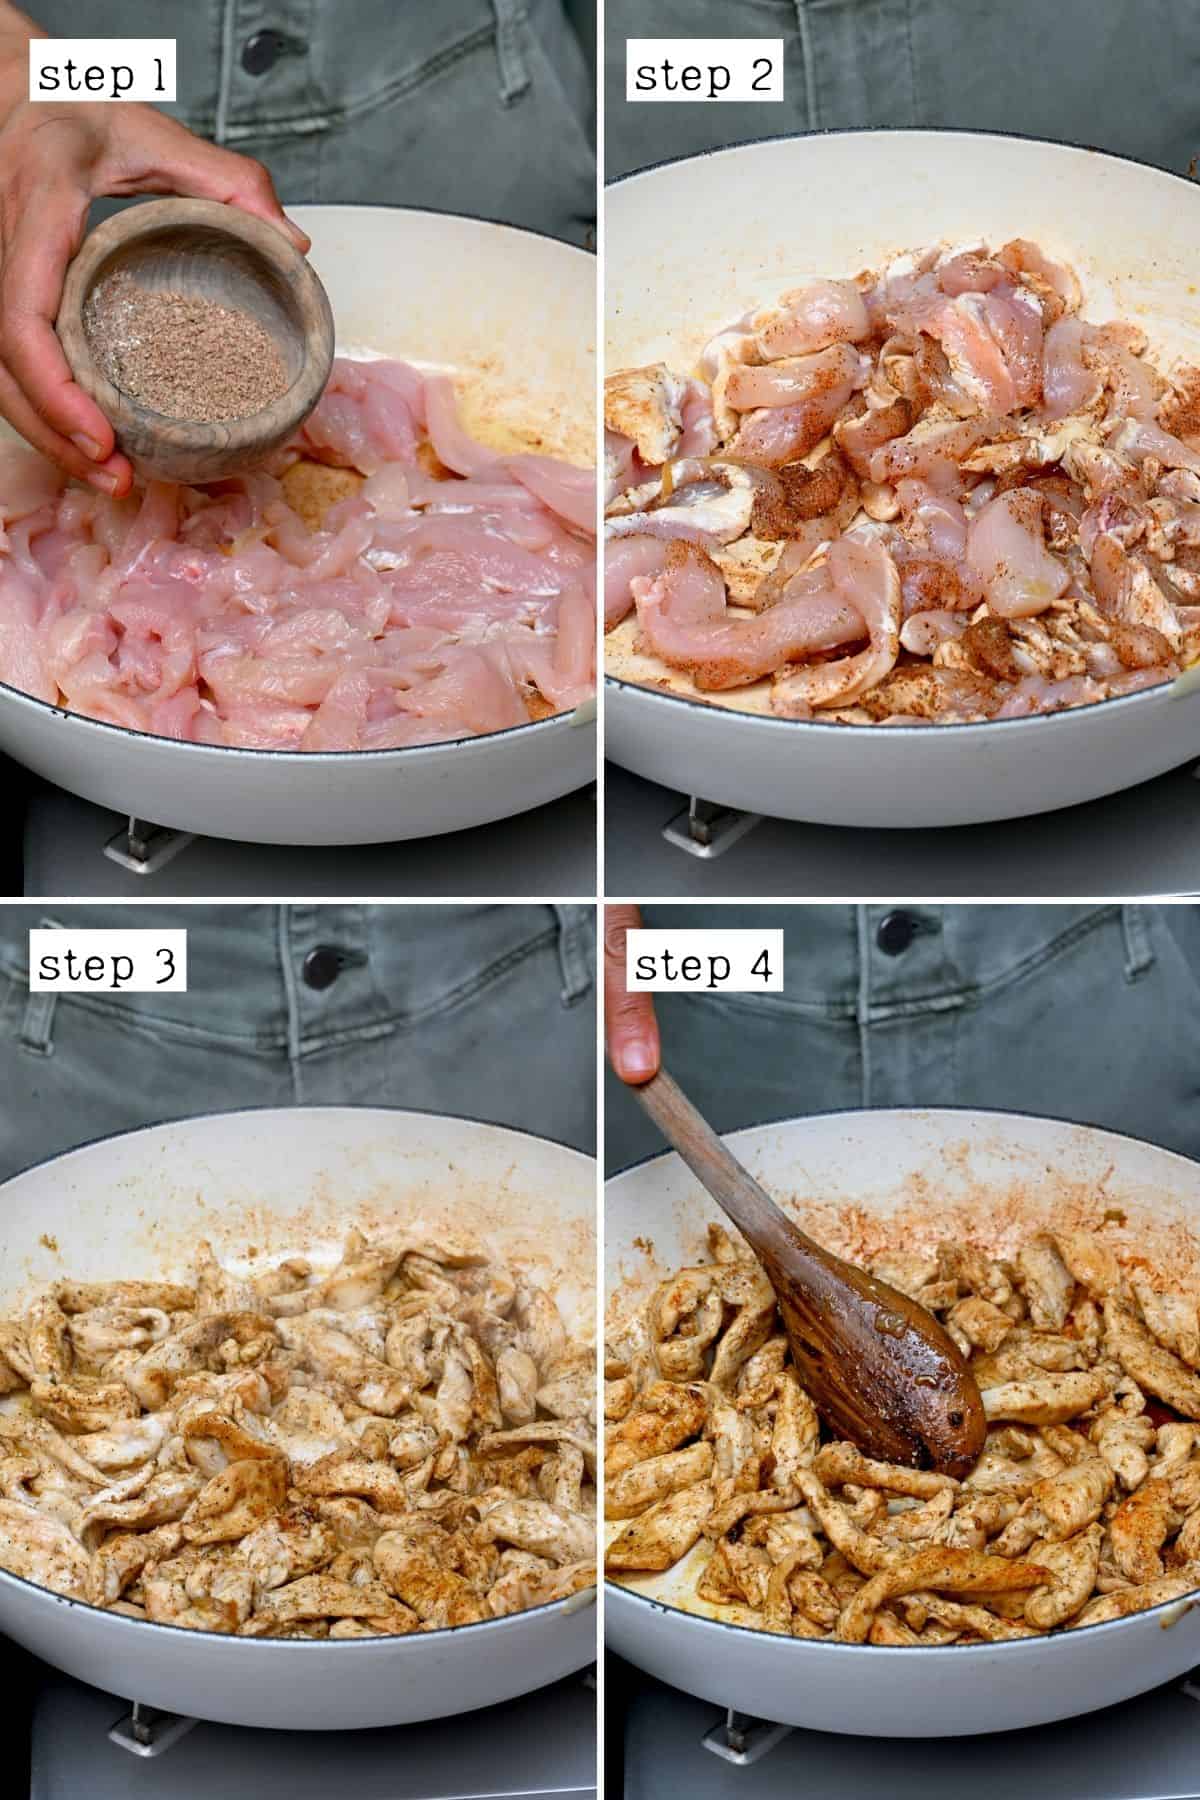 Steps for cooking chicken with spices